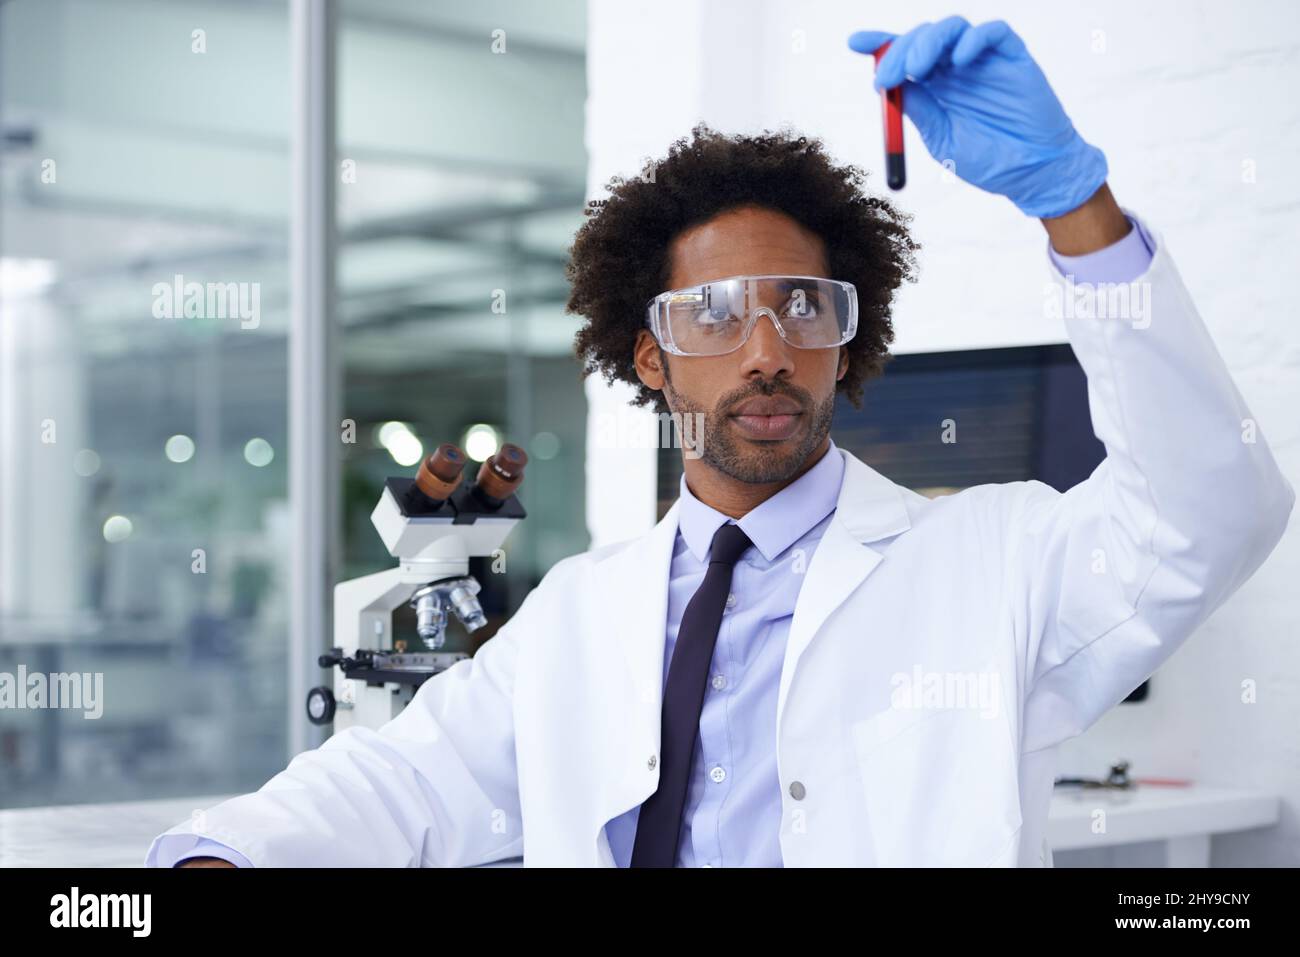 Let the analyzing begin. Shot of a male medical scientist holding a test tube filled with blood. Stock Photo